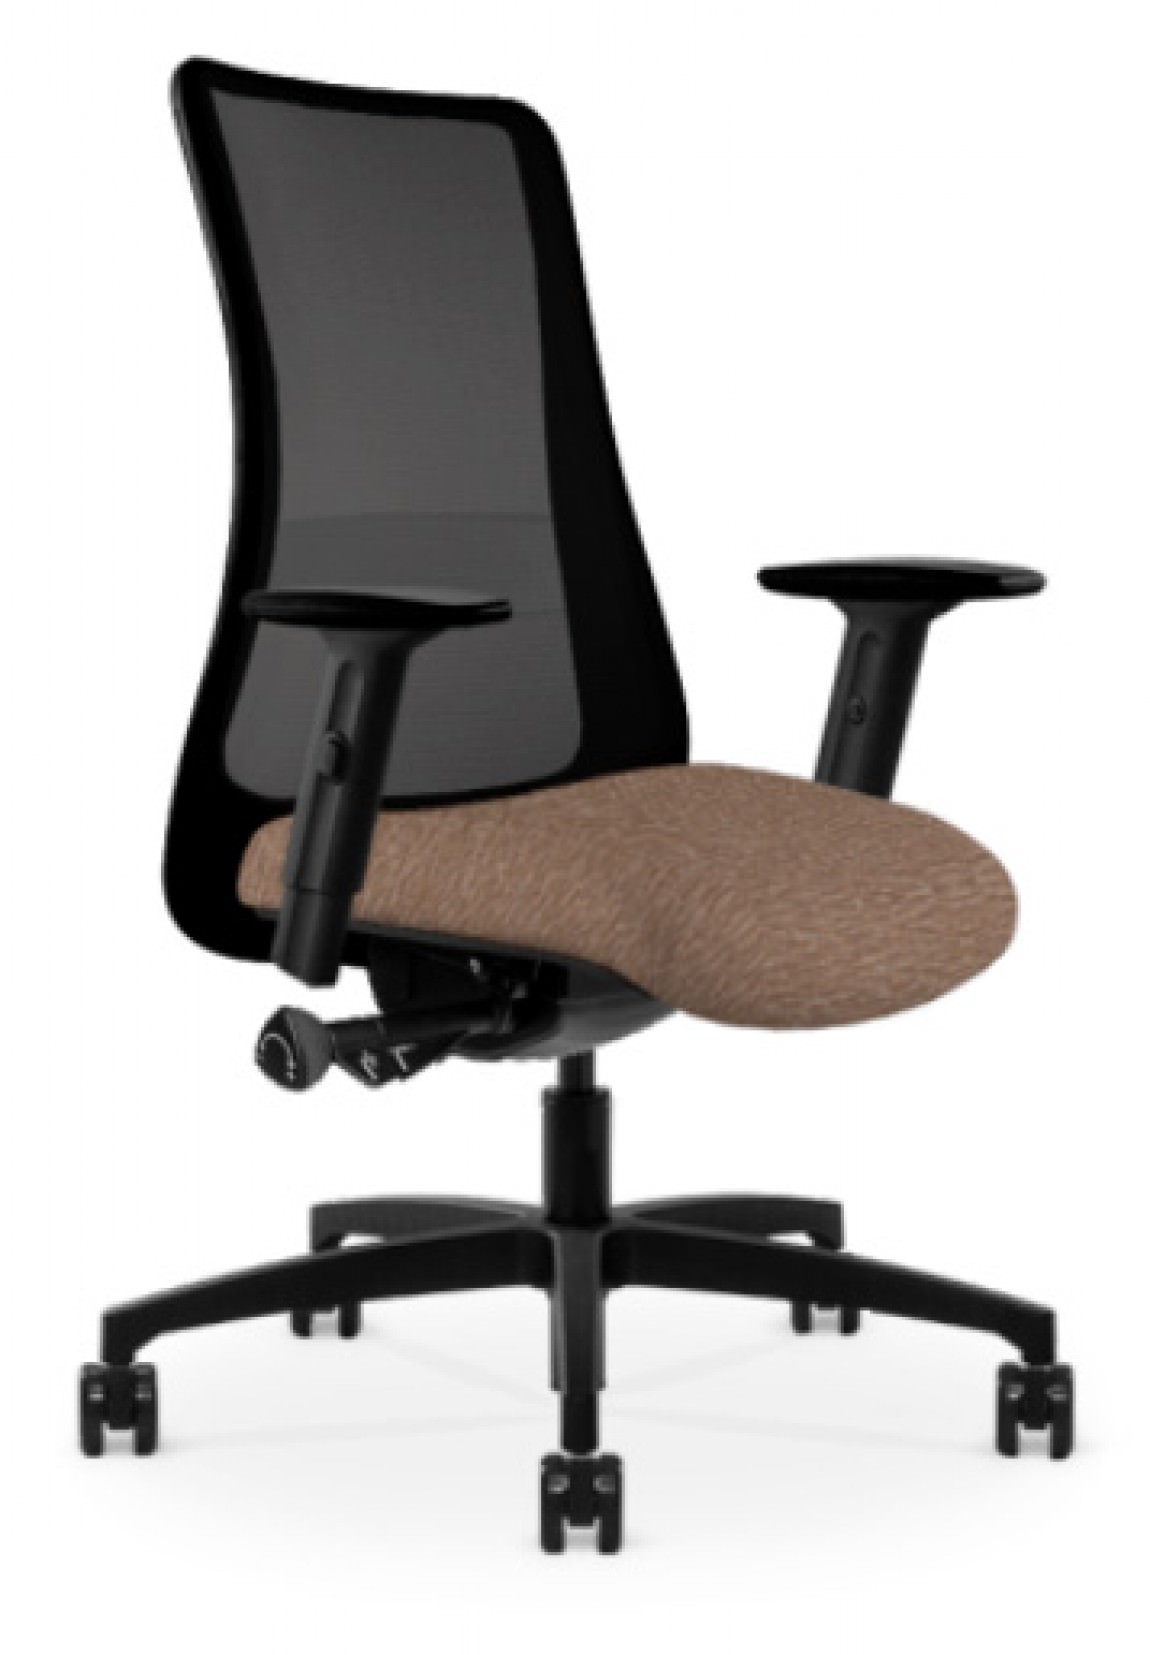 Black Copper Mesh Antimicrobial Office Chair w/ Light Brown Seat